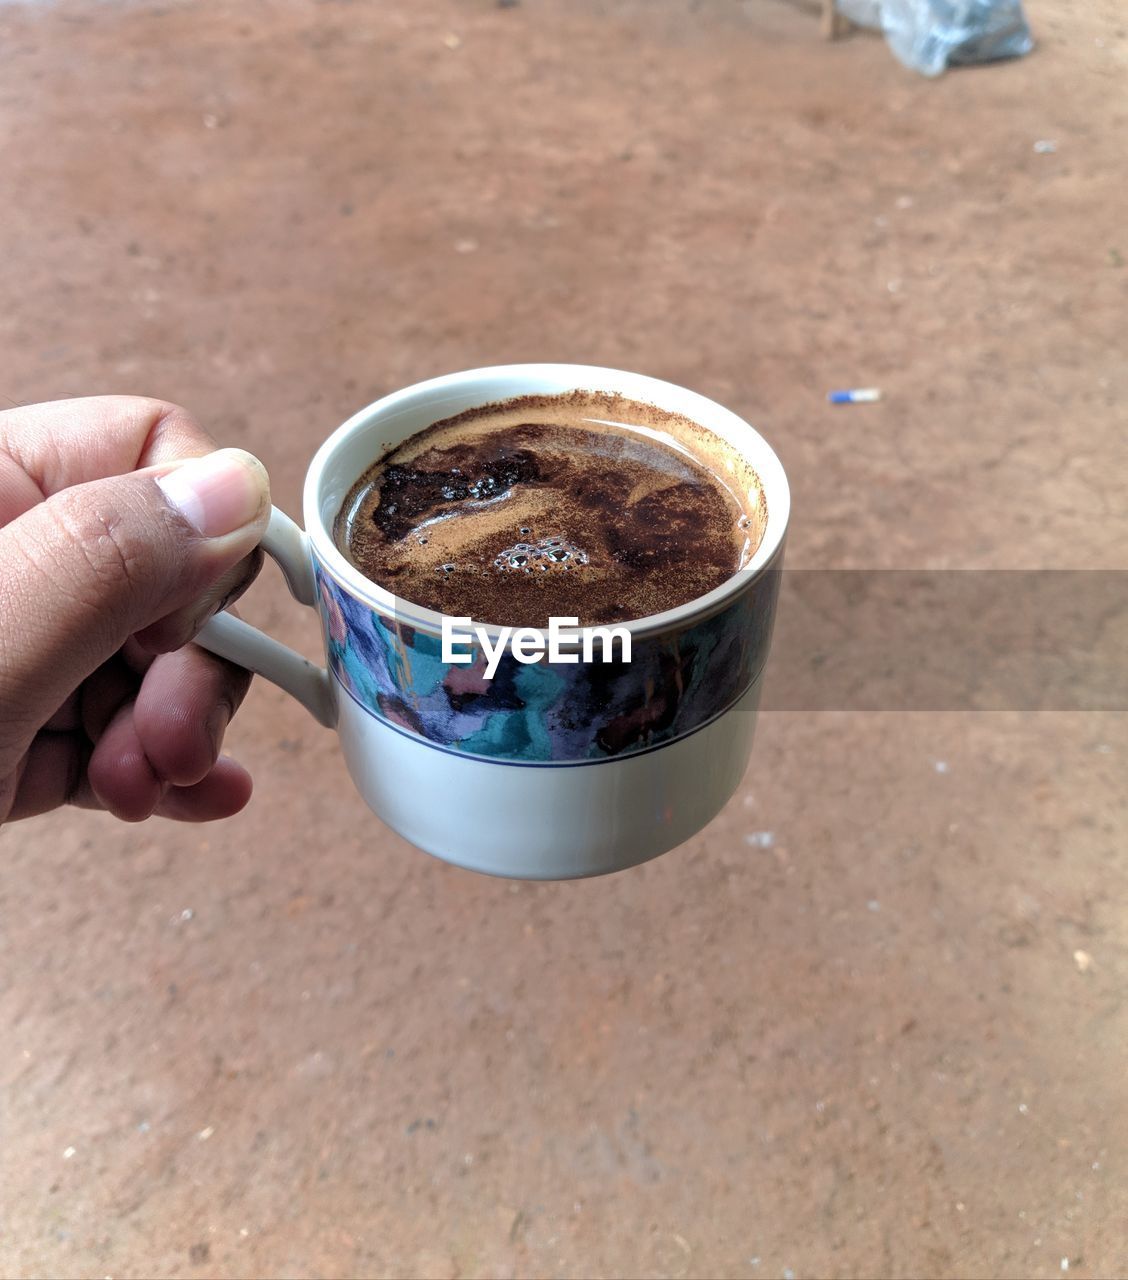 hand, food and drink, cup, holding, one person, drink, mug, refreshment, food, high angle view, coffee, lifestyles, day, coffee cup, adult, close-up, freshness, outdoors, focus on foreground, hot drink, nature